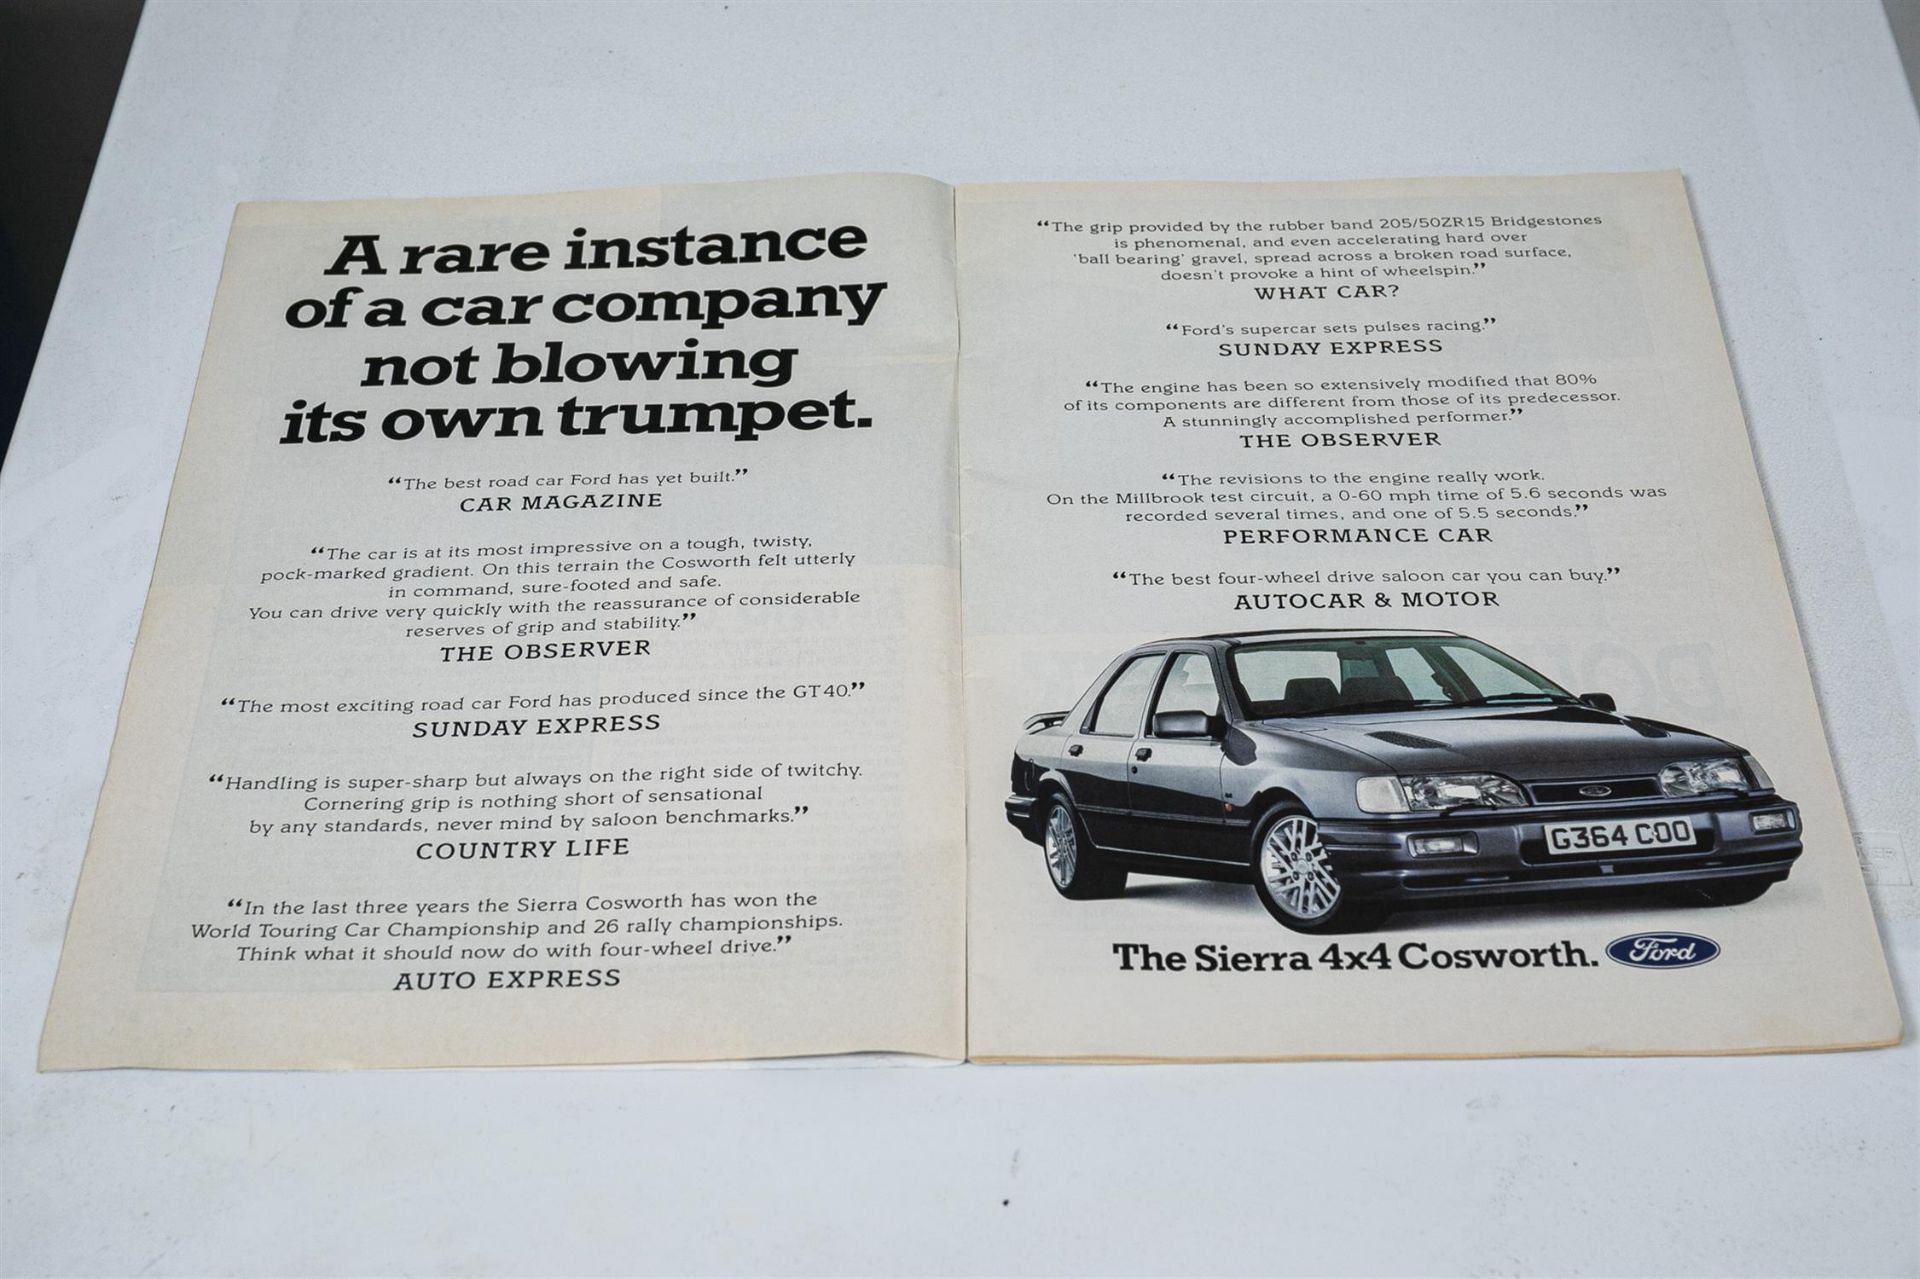 1990 Ford Sierra Sapphire RS Cosworth 4x4 - ex-Press Car - Image 9 of 10